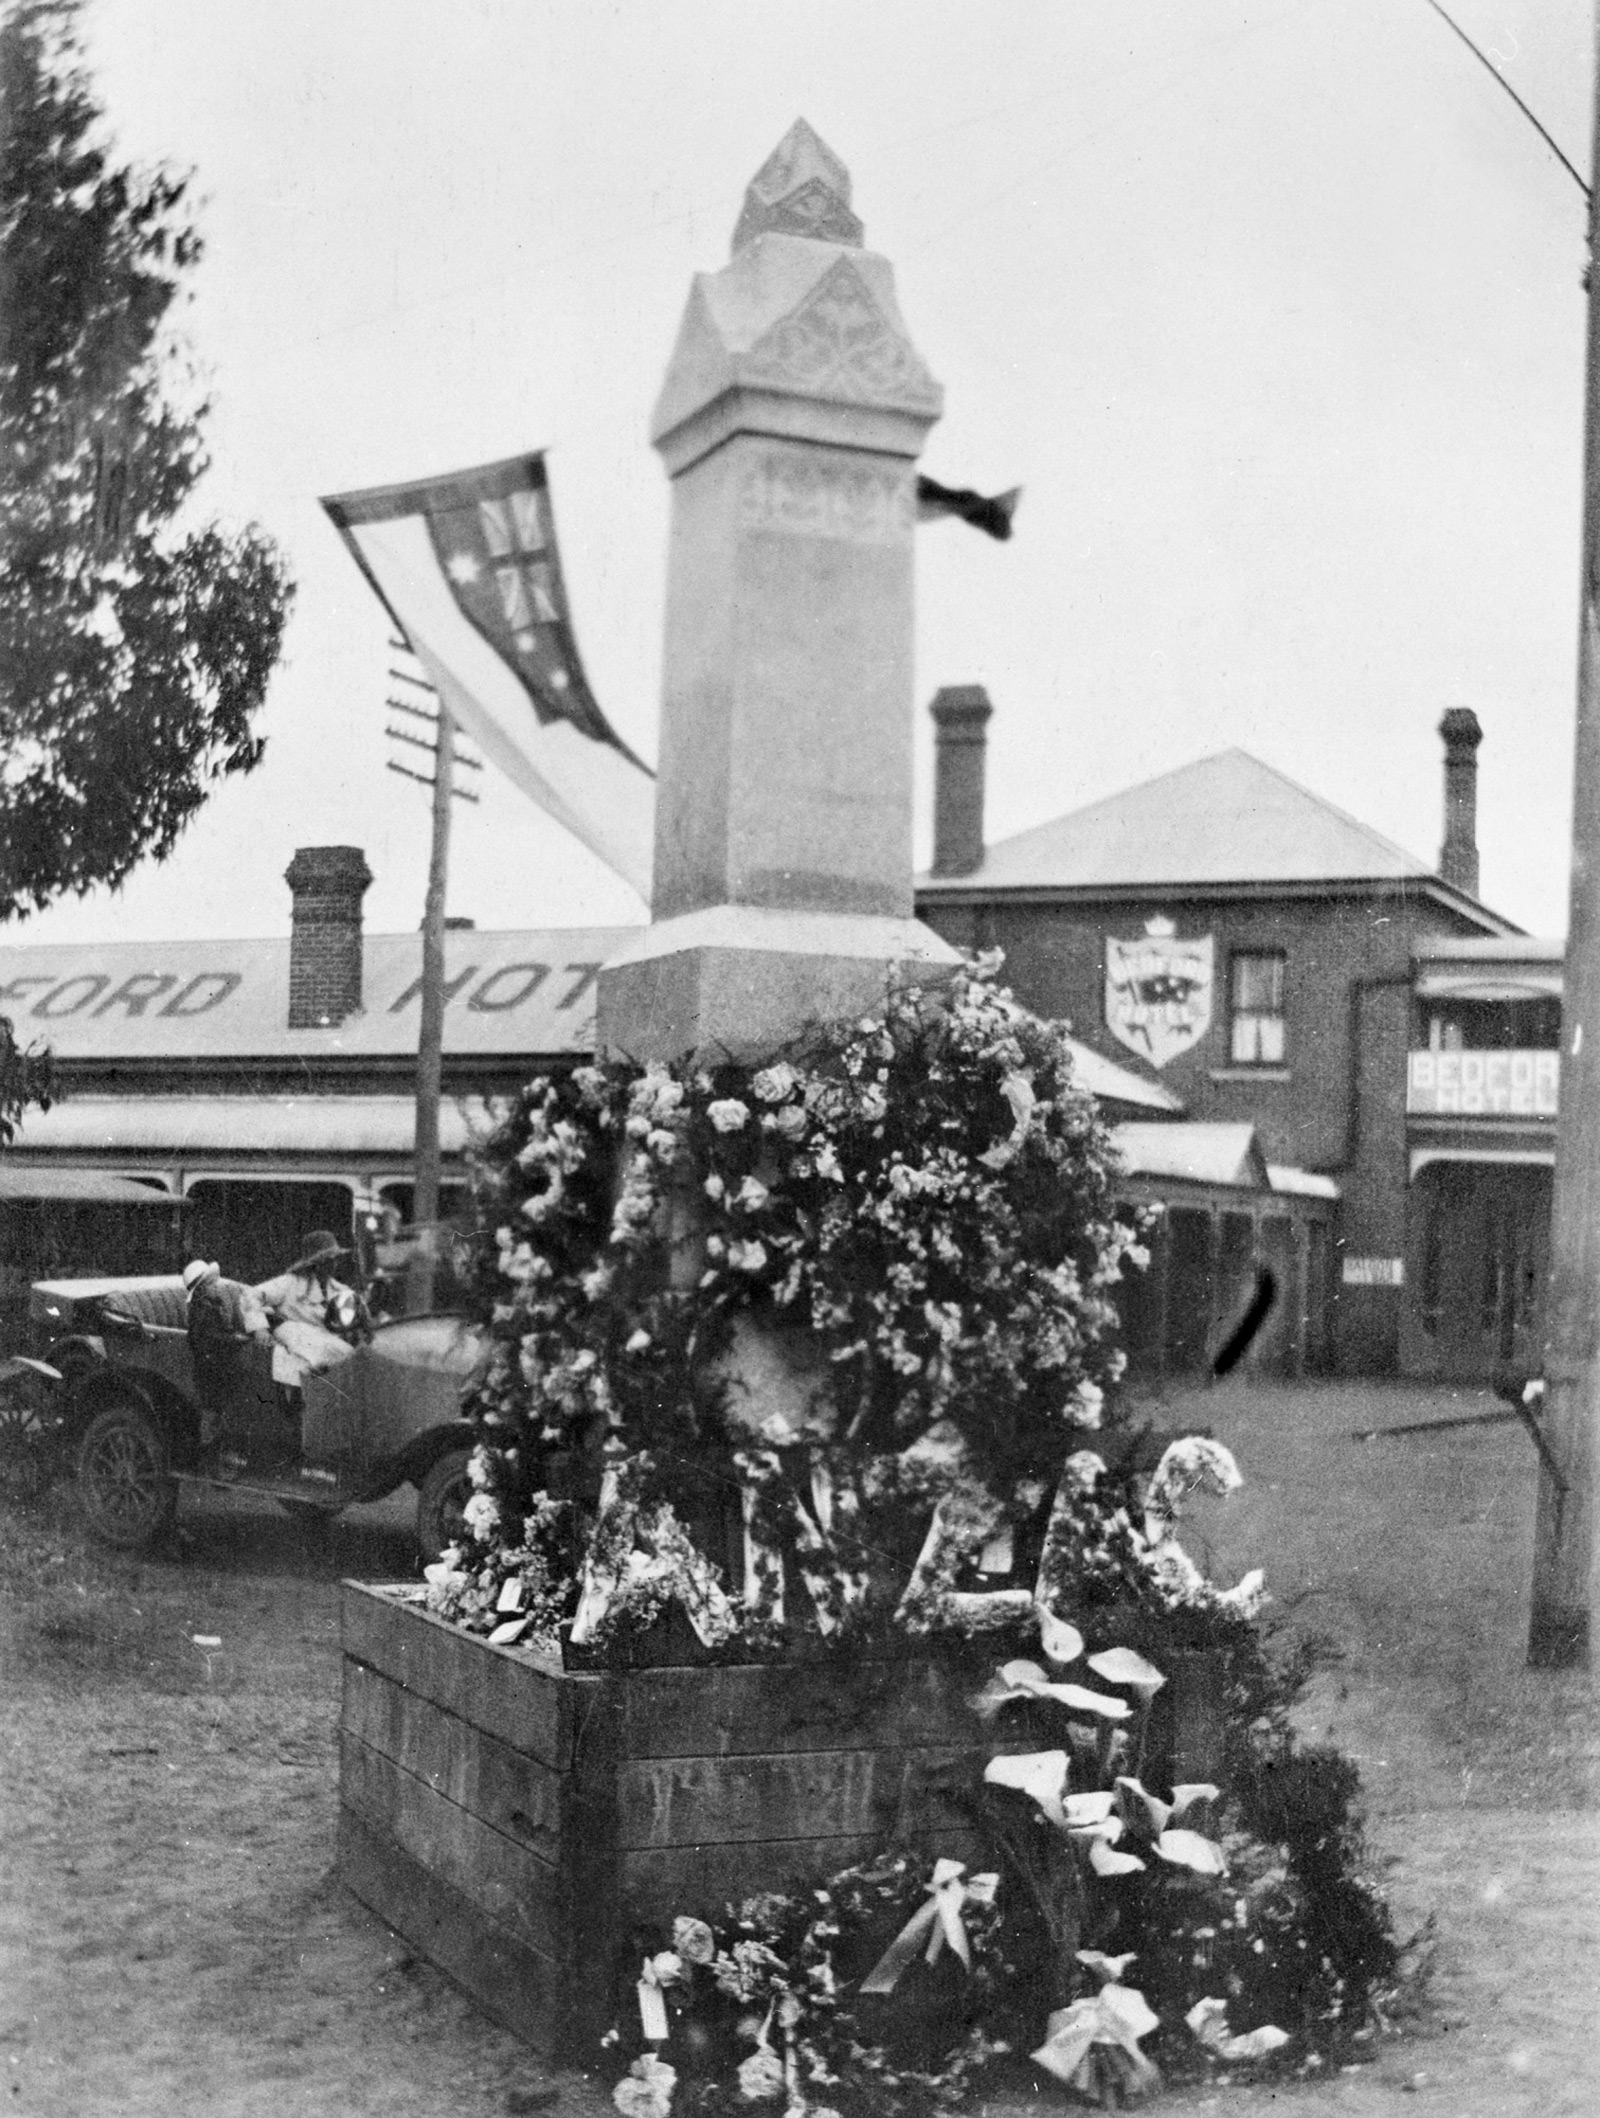 First World War memorial after a ceremony, Bookton, Western Australia, 1921